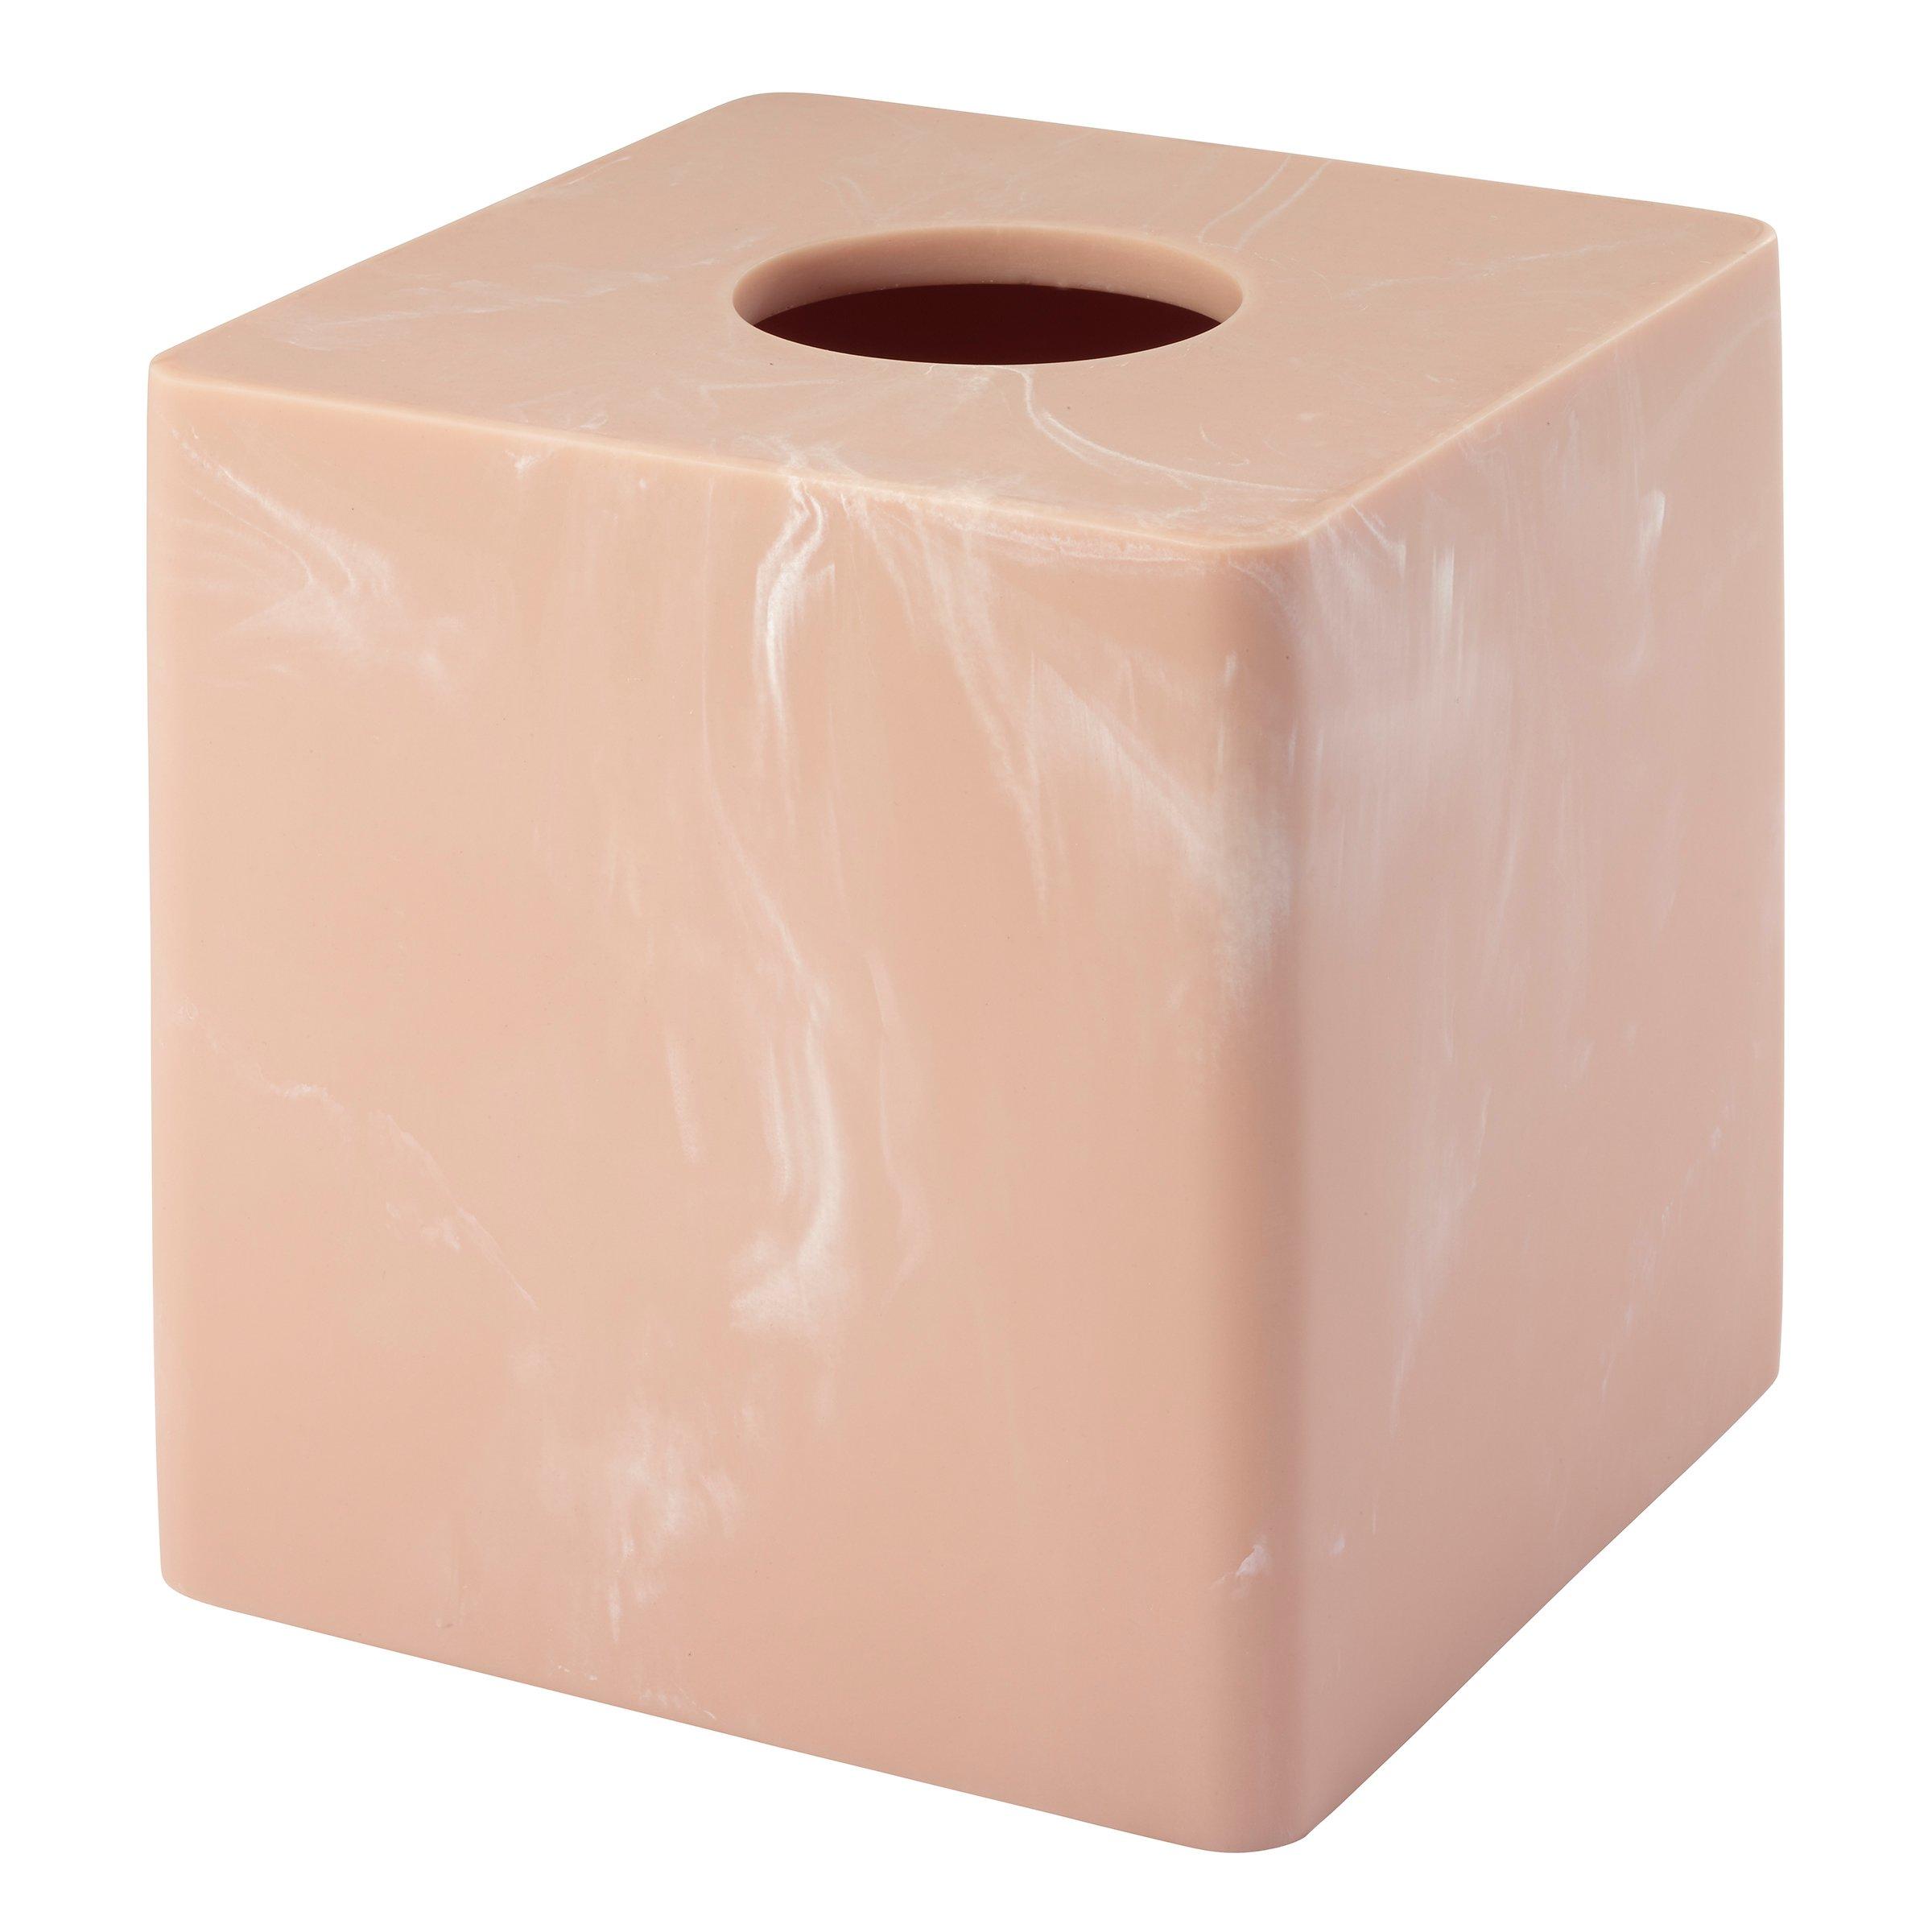 Kendall Bathroom Collection Tissue Box Cover